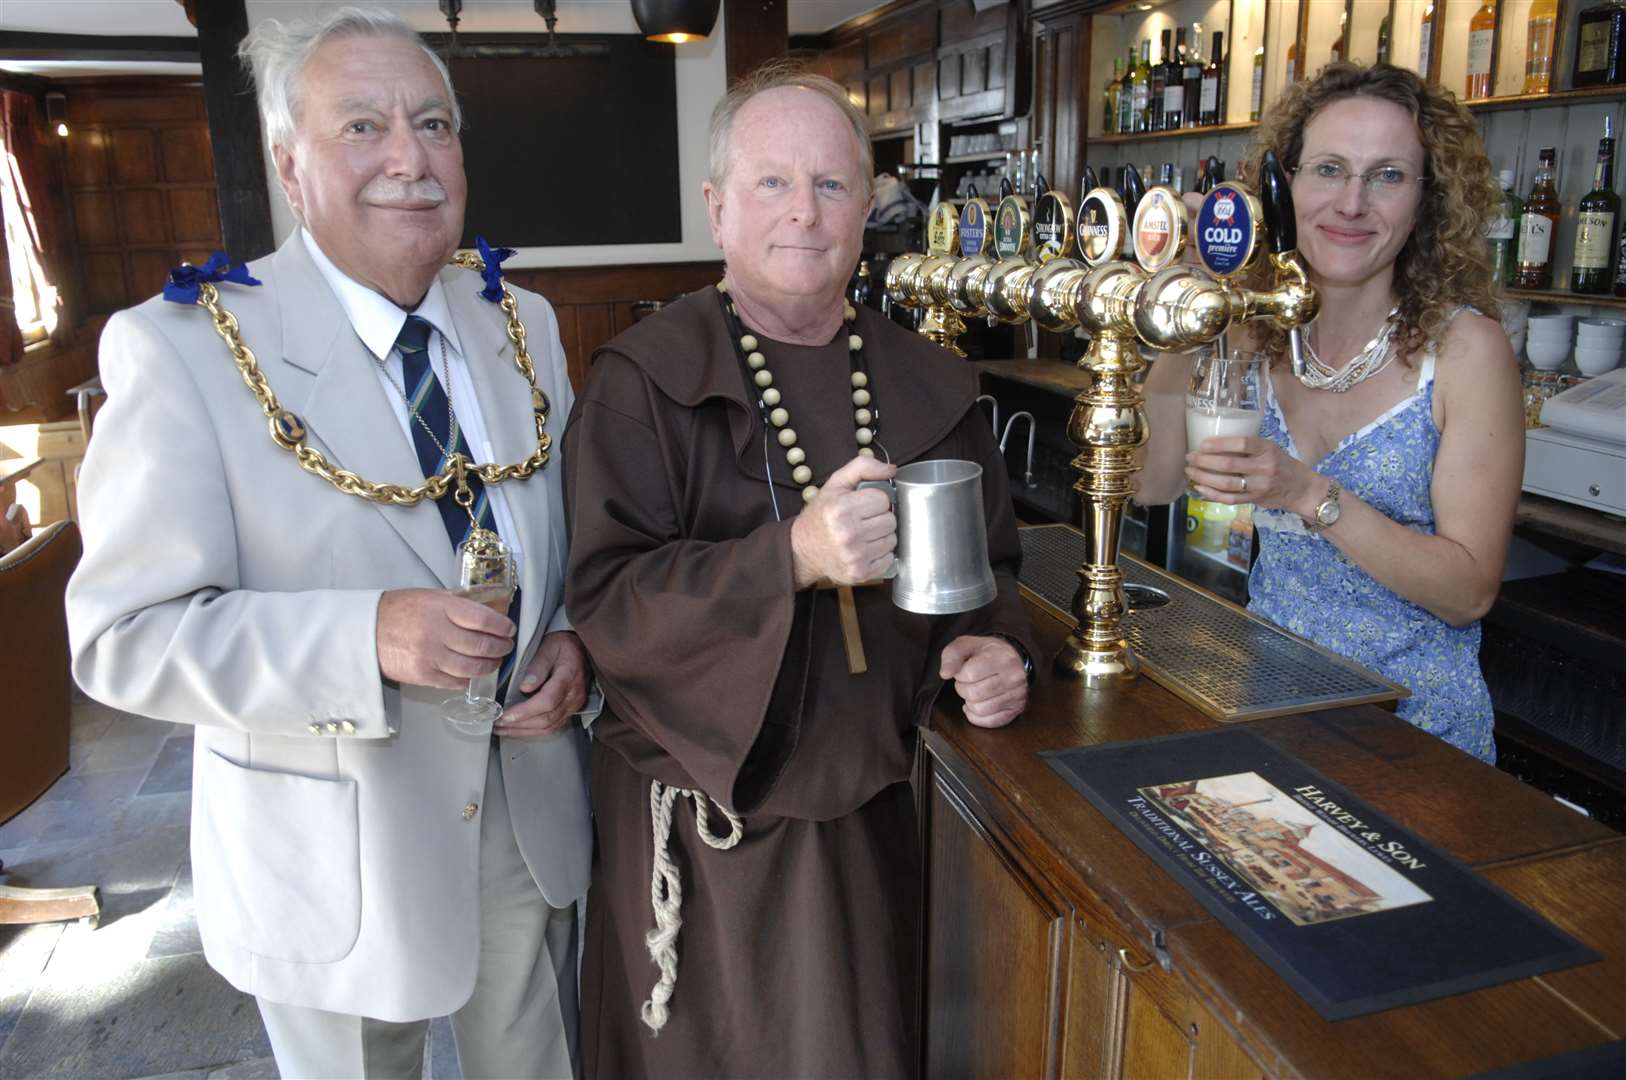 The Mayor of Maidstone Peter Parvin with Brother Jonathan from Ampelforth and landlady Natasha Chaussy, at the launch party for the Dirty Habit in 2009. Picture: Matthew Walker